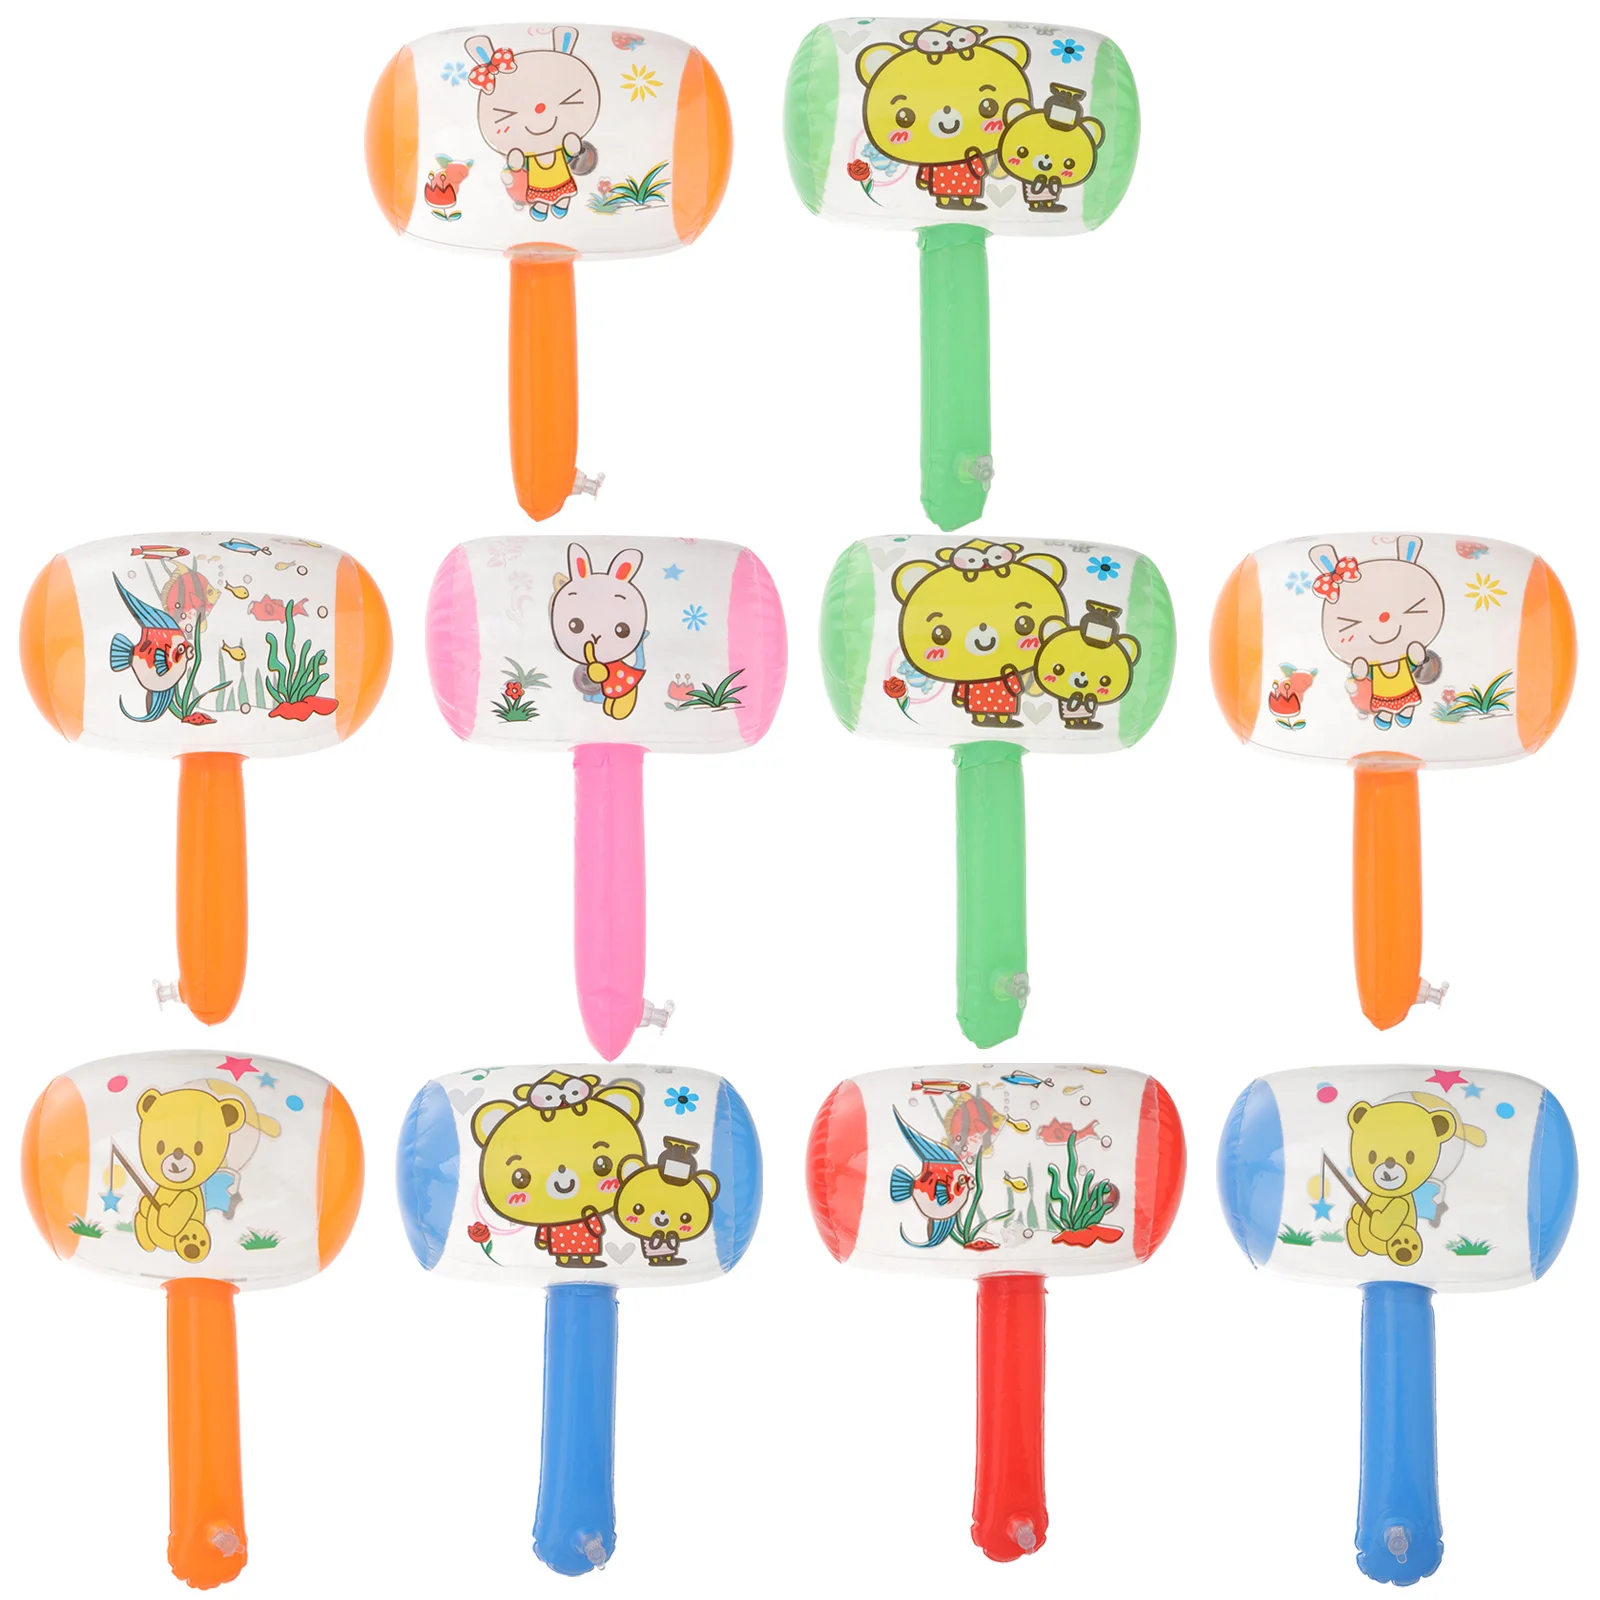 Toys Baby Hand Grip Toy Plastic Hammers Toys Kids Party Decorations  Construction Party Supplies Birthday Party Favors 40 30cm freezing anna elsa pinata party supplies kids disposable plastic children s birthday girls party favors